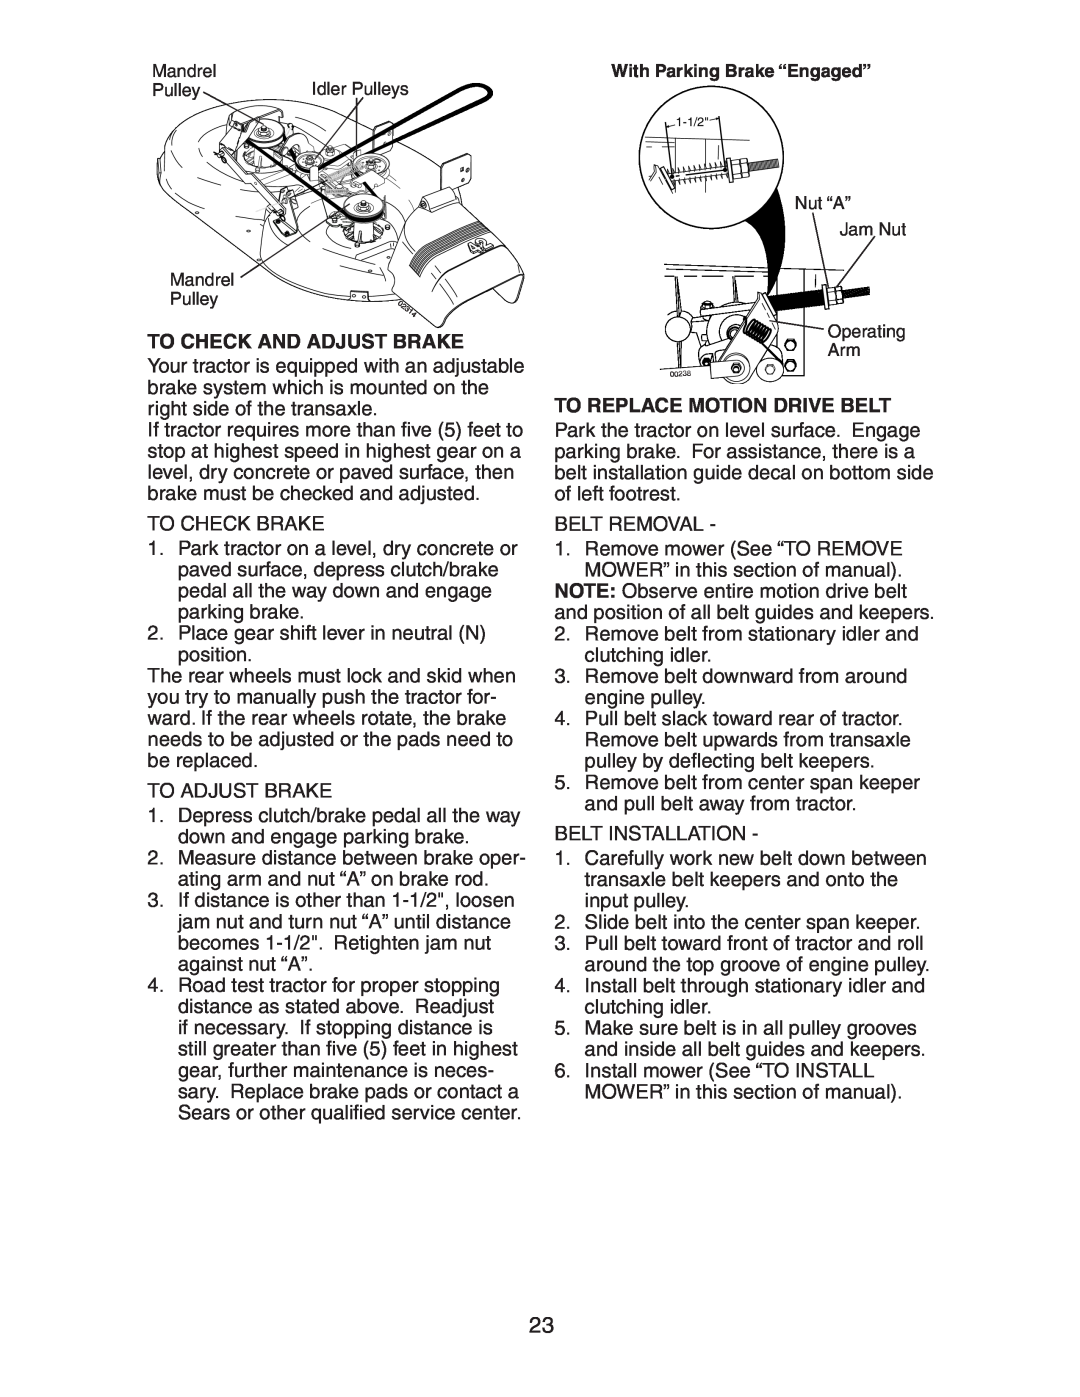 Craftsman 917.27581 owner manual To Check And Adjust Brake, To Replace Motion Drive Belt, With Parking Brake “Engaged” 